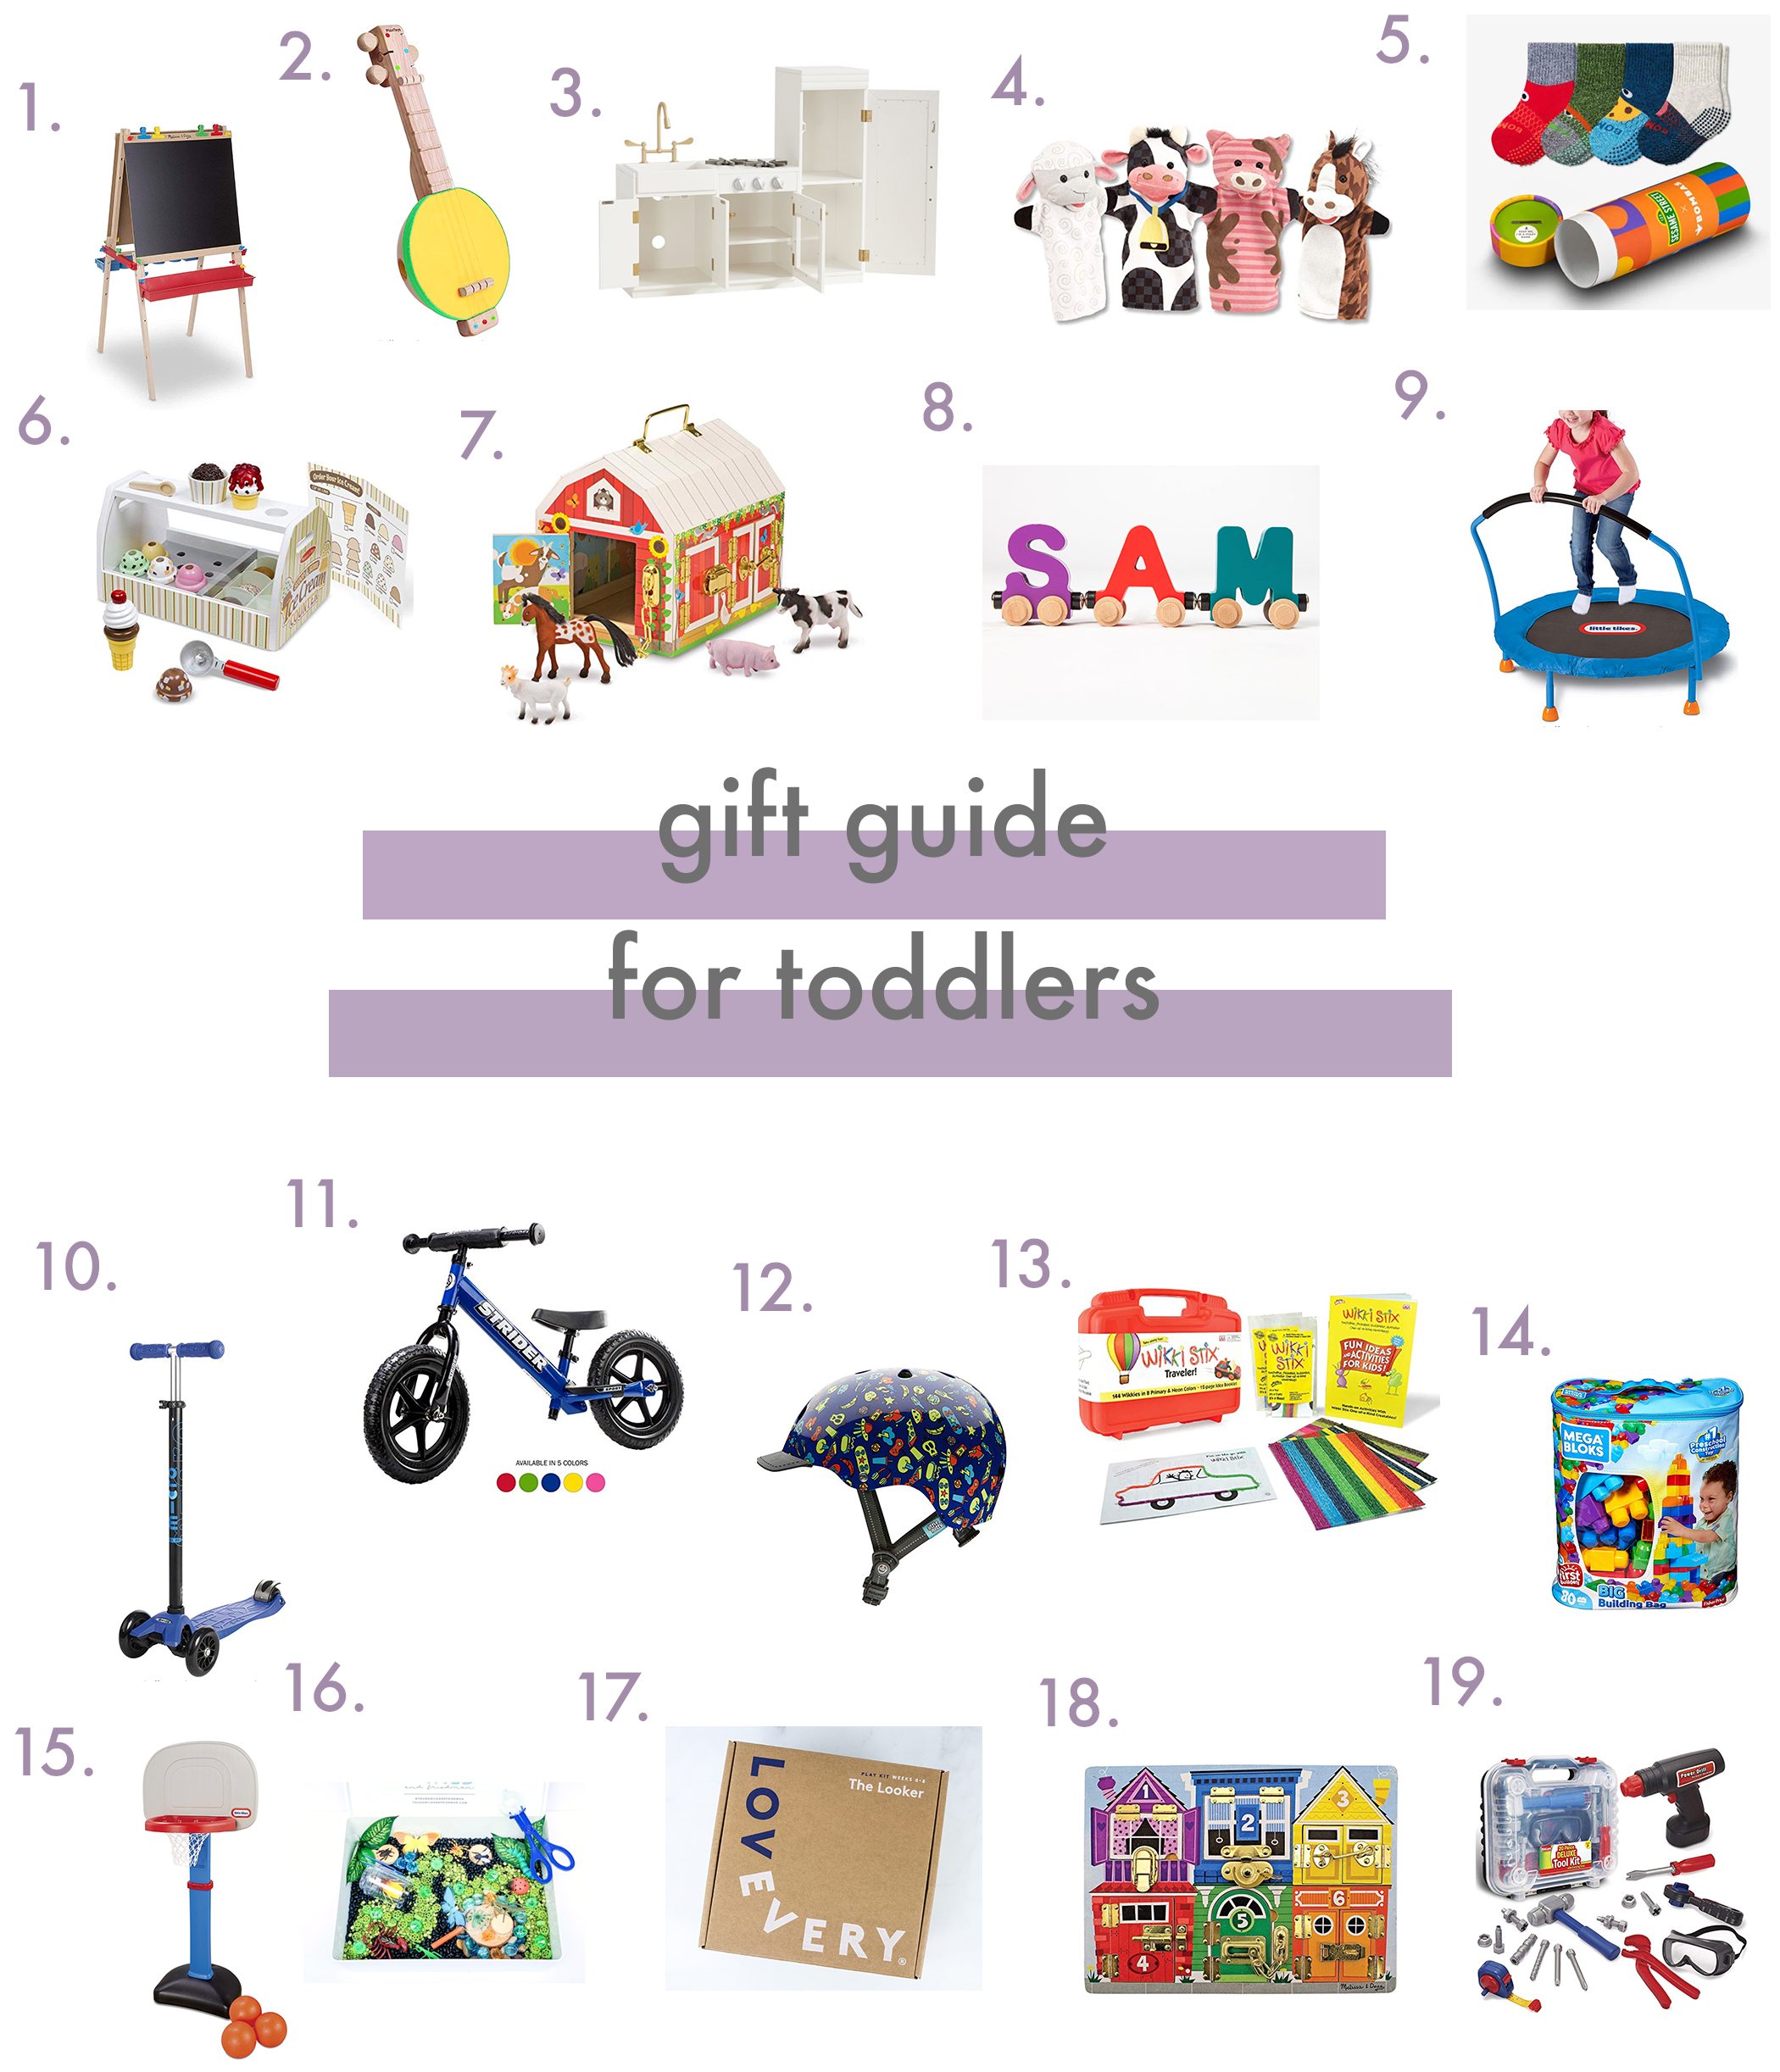 Toy Gift Guide For Babies+Toddlers+Kids - House of Eilers